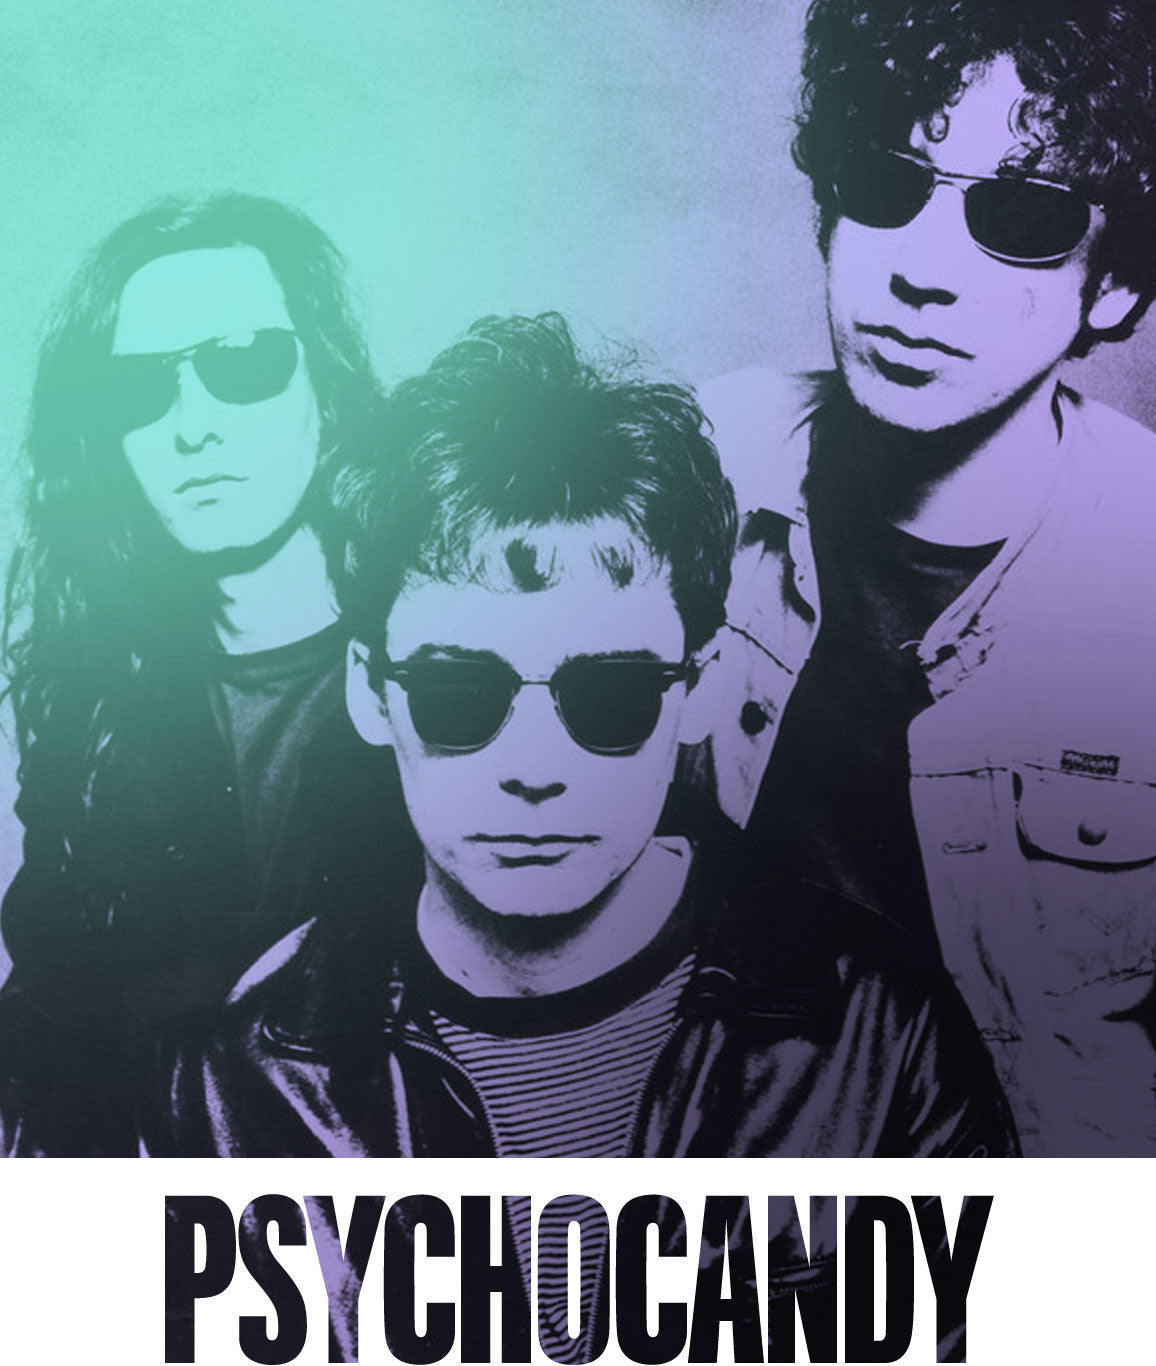 The Music Behind the Tea: Psychocandy